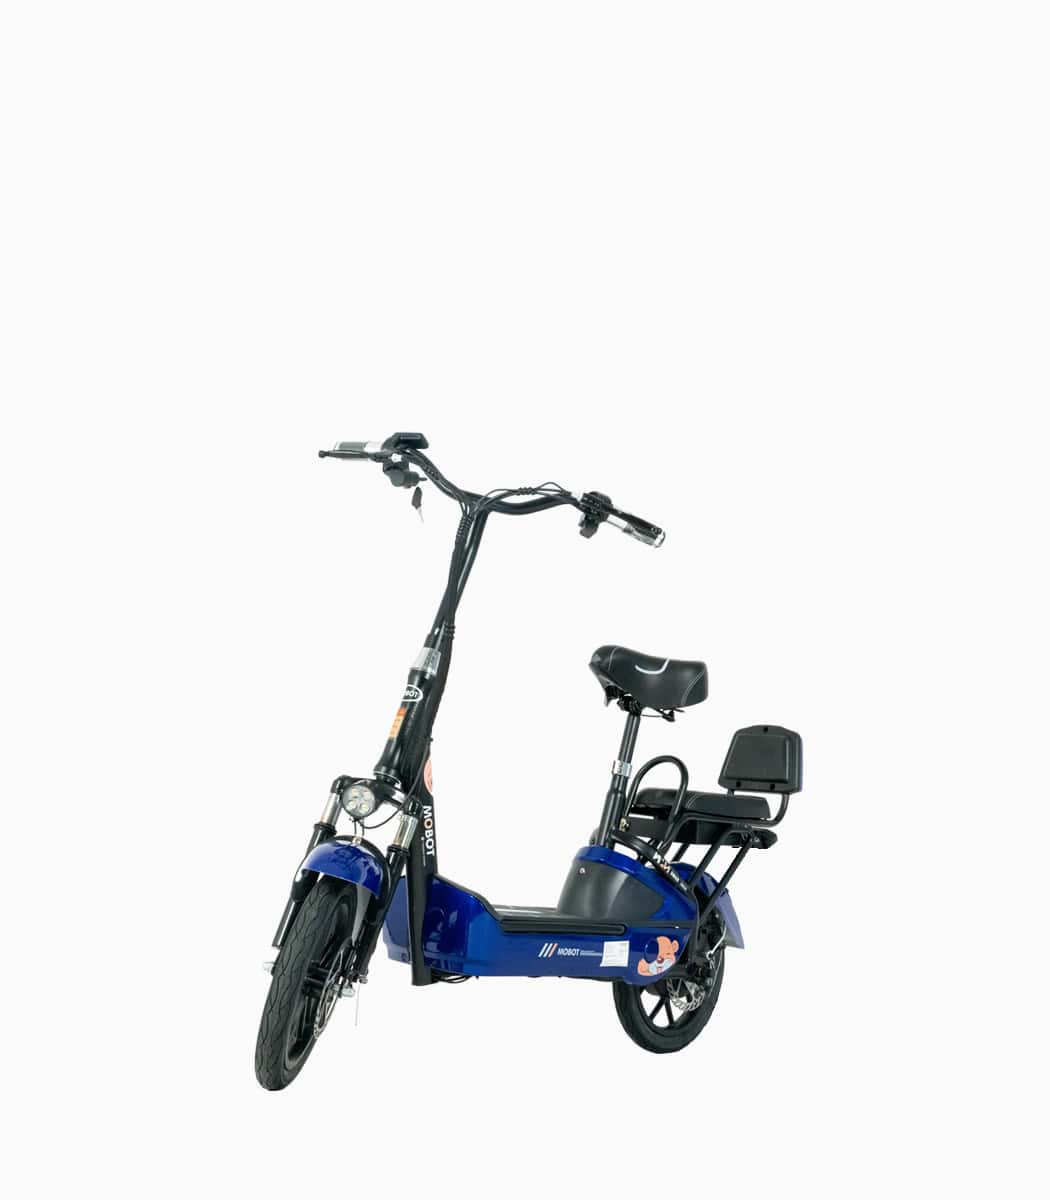 MOBOT EV (Blue10AH) UL2272 certified seated e-scooter angled left